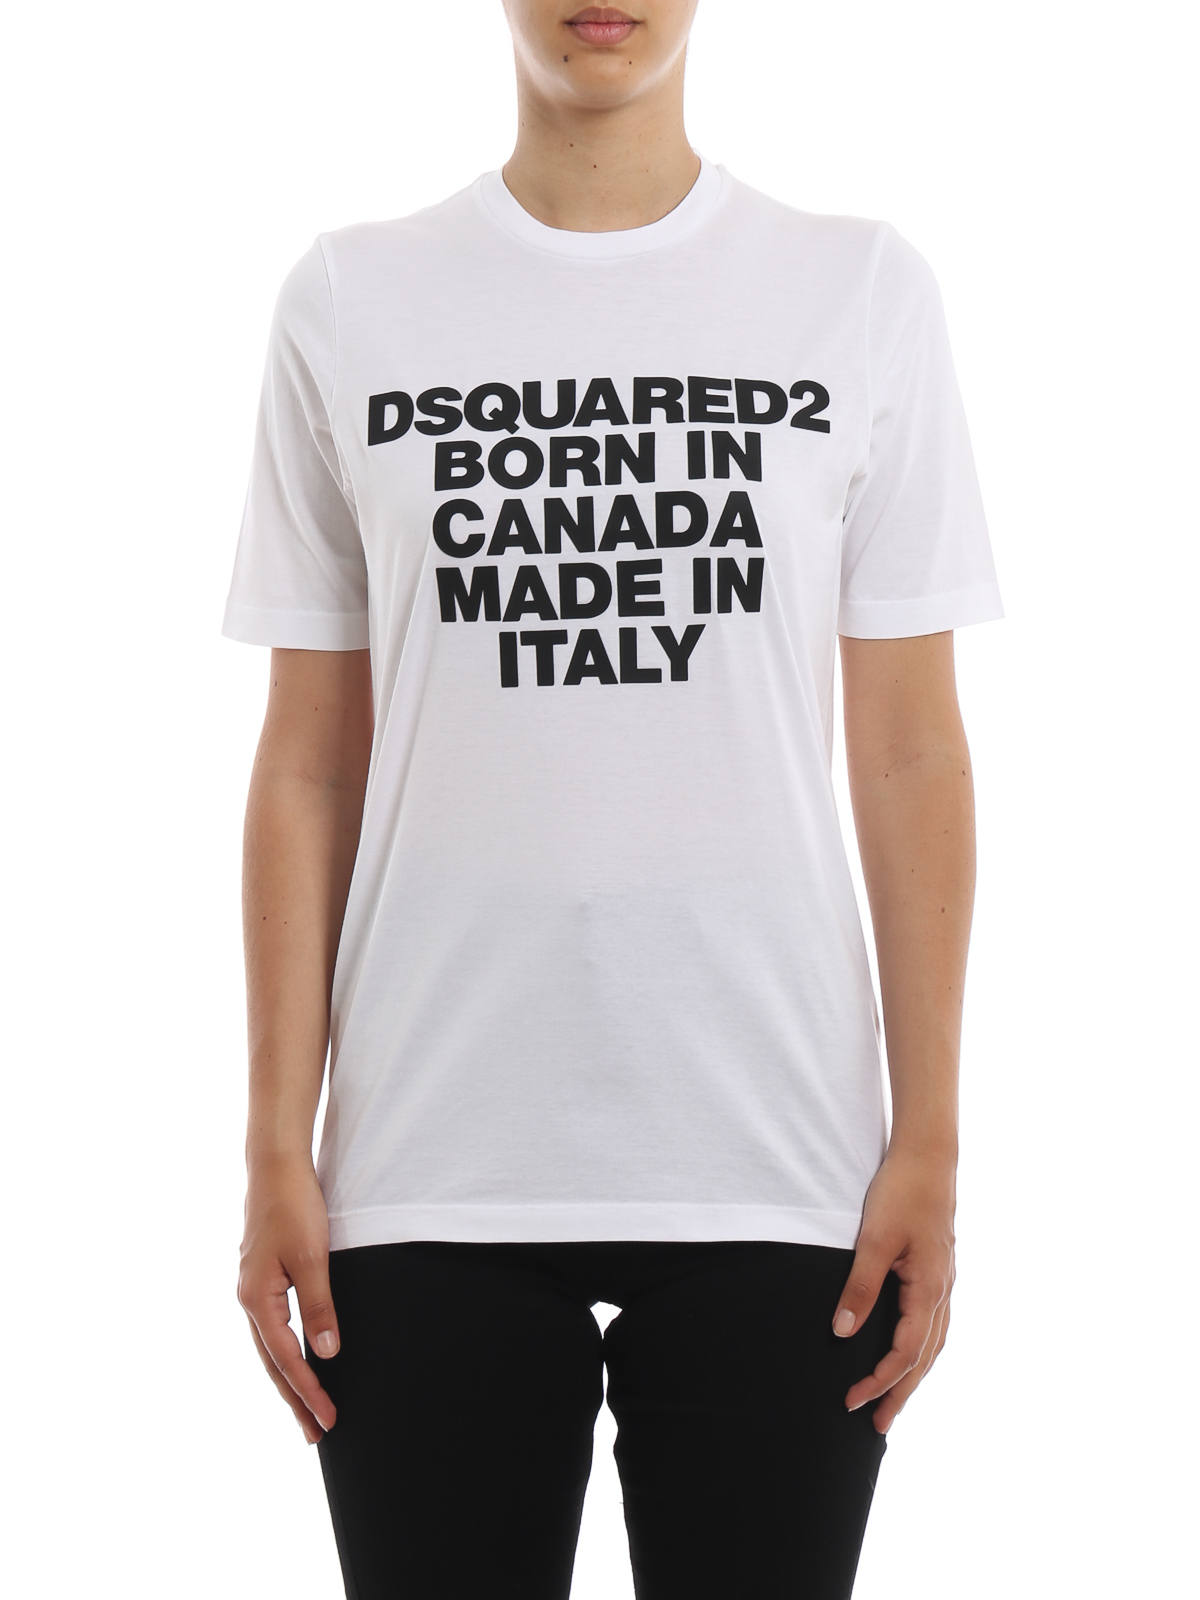 dsquared2 shirt made in italy